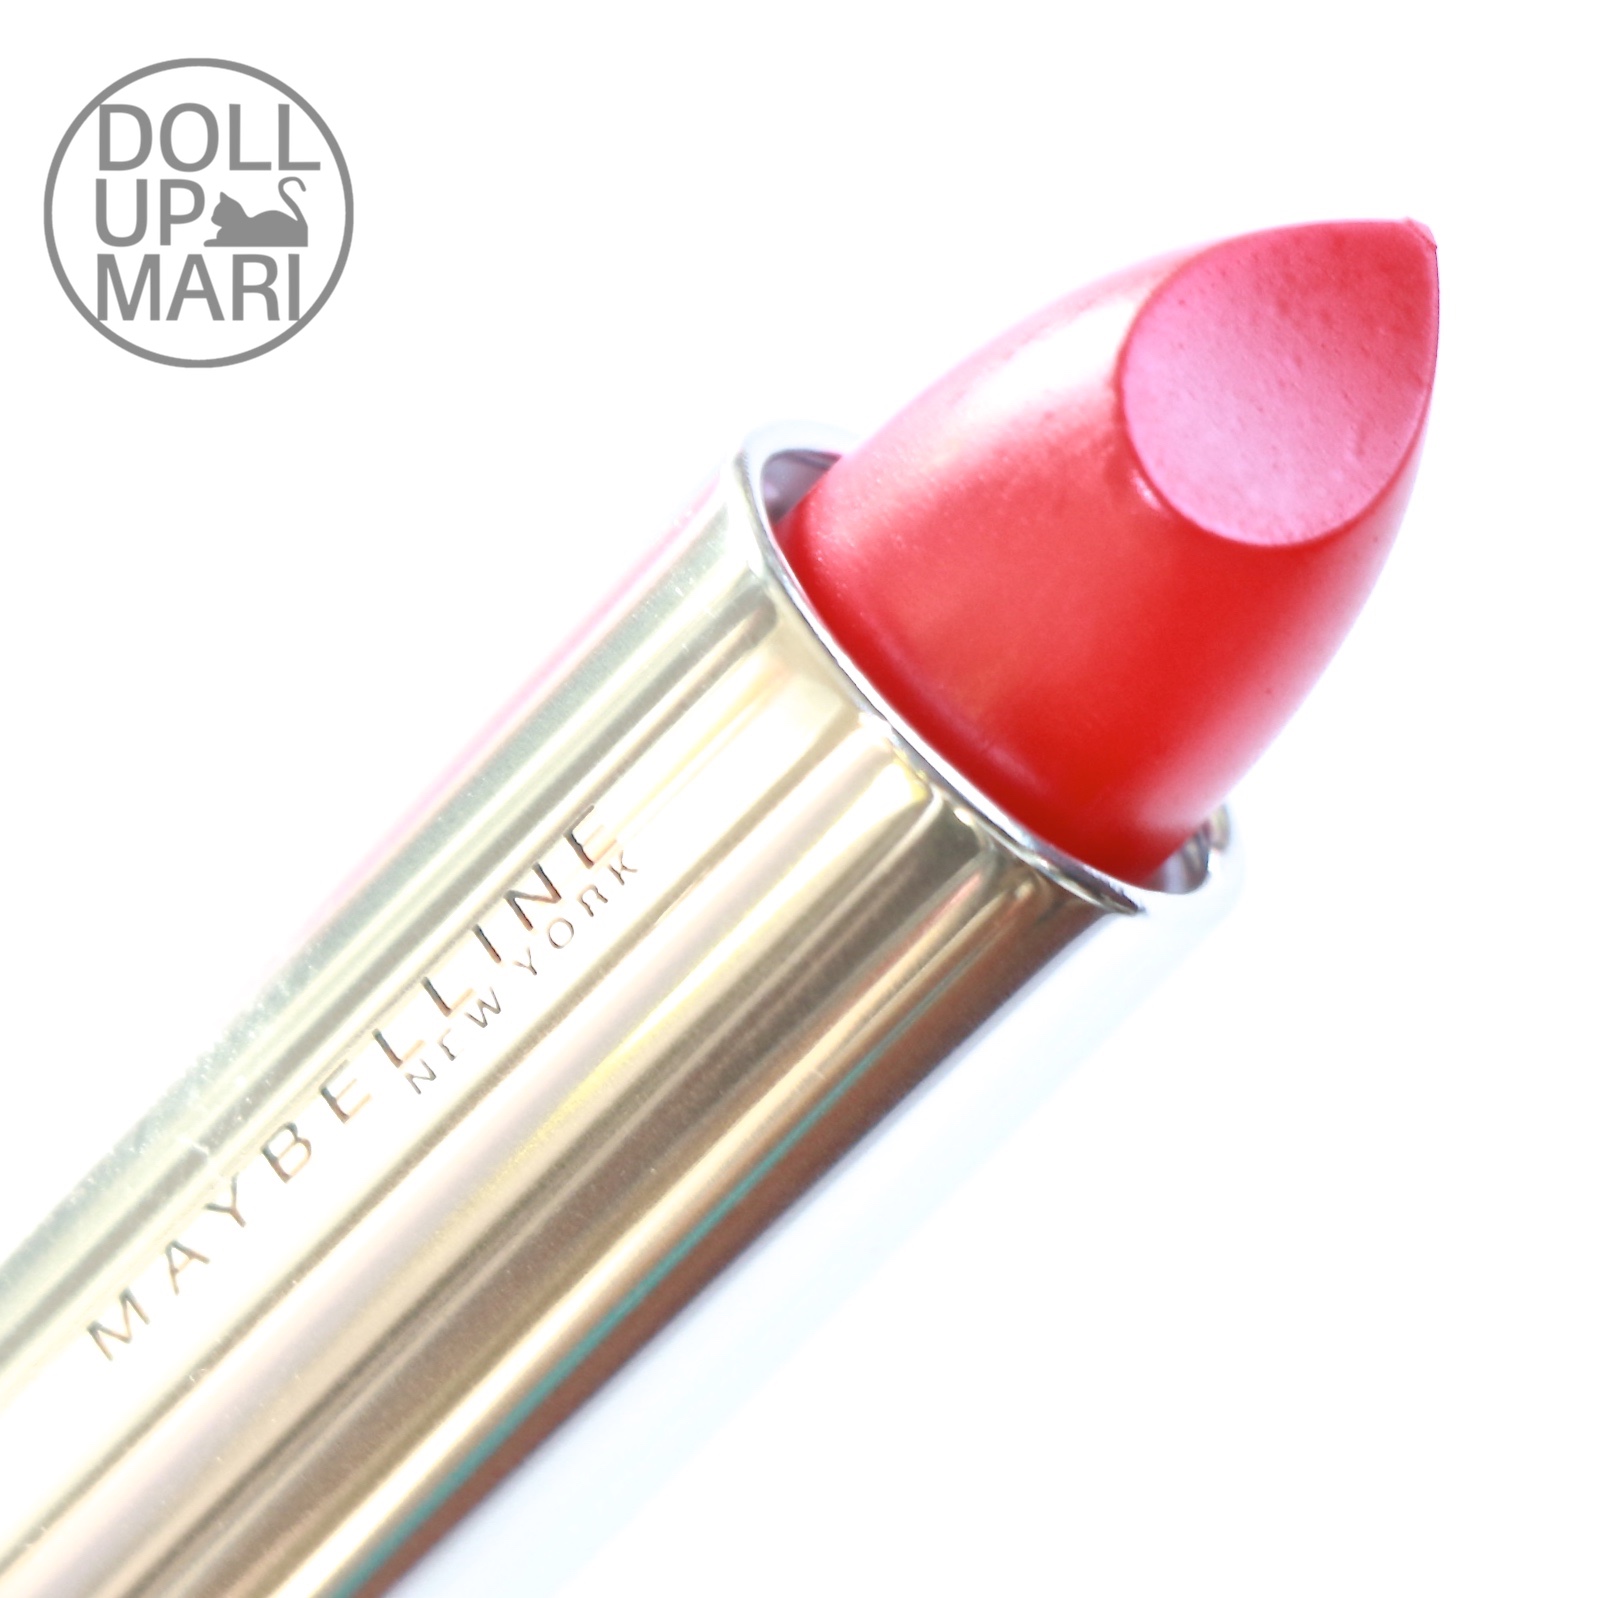 Maybelline Bold Matte (Mat 4) Lipstick Review and Swatches Doll Up Mari